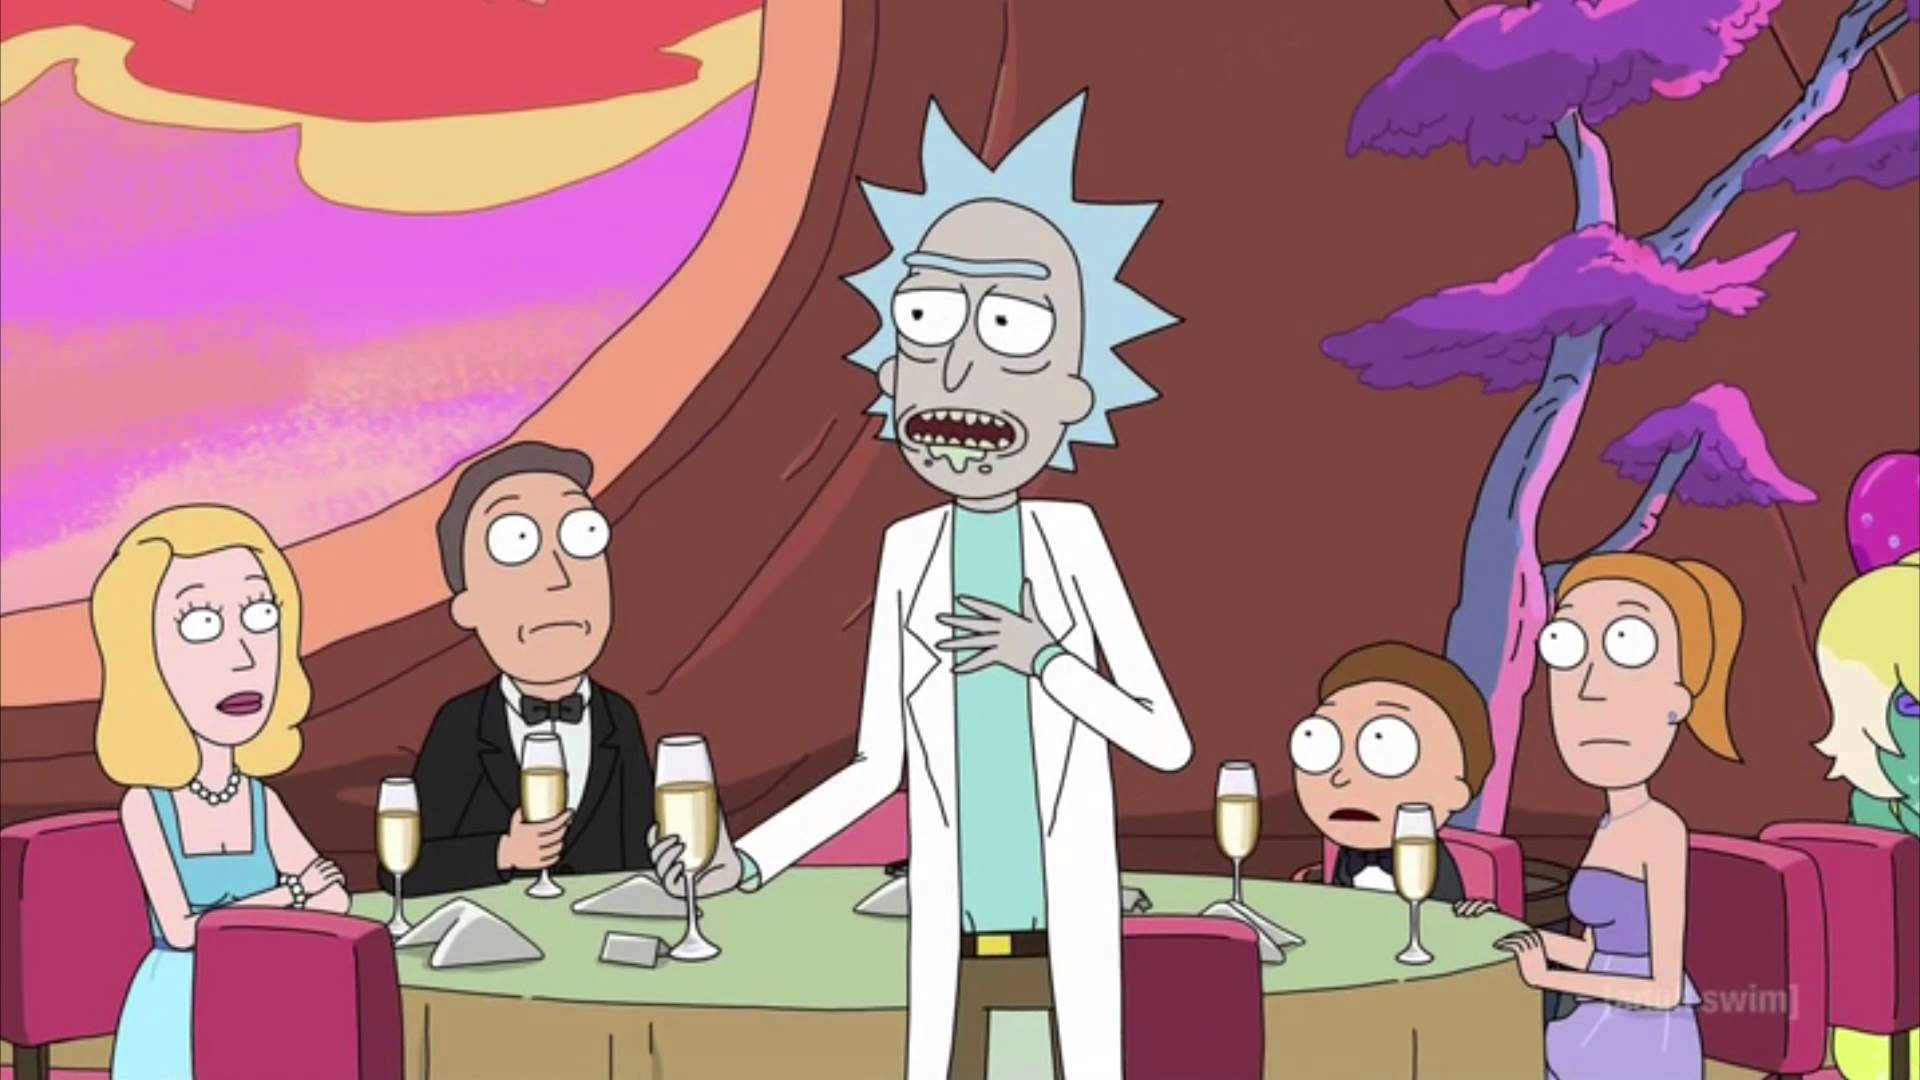 rick and morty is loaded with choice quotes about existentialism and nihilism and science